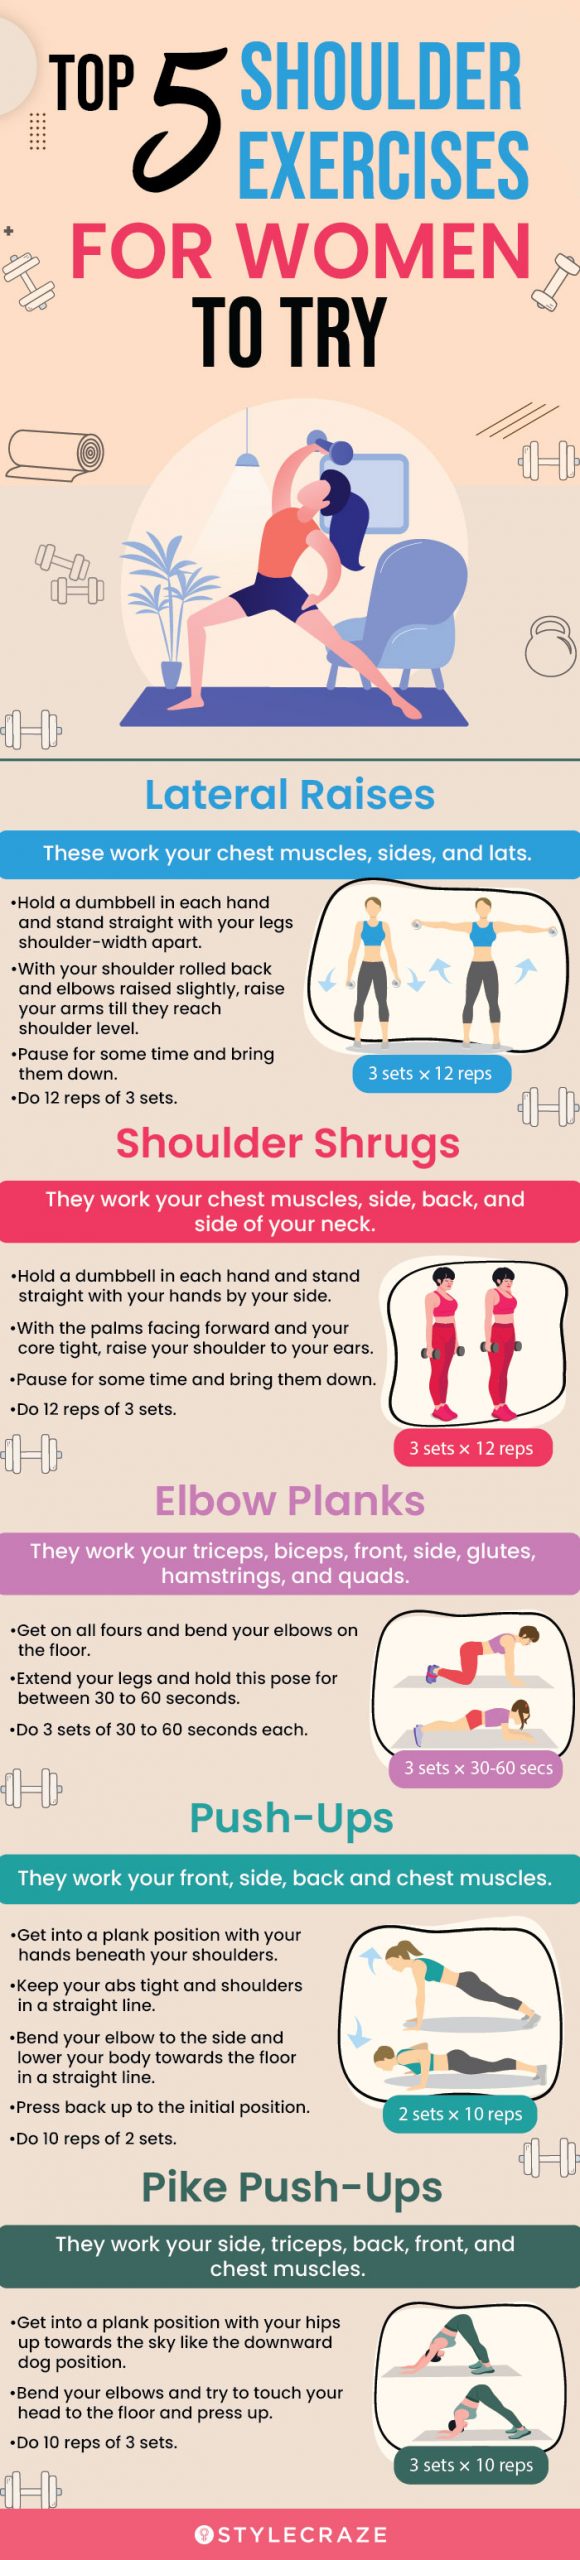 top 5 shoulder exercises for women to try (infographic)